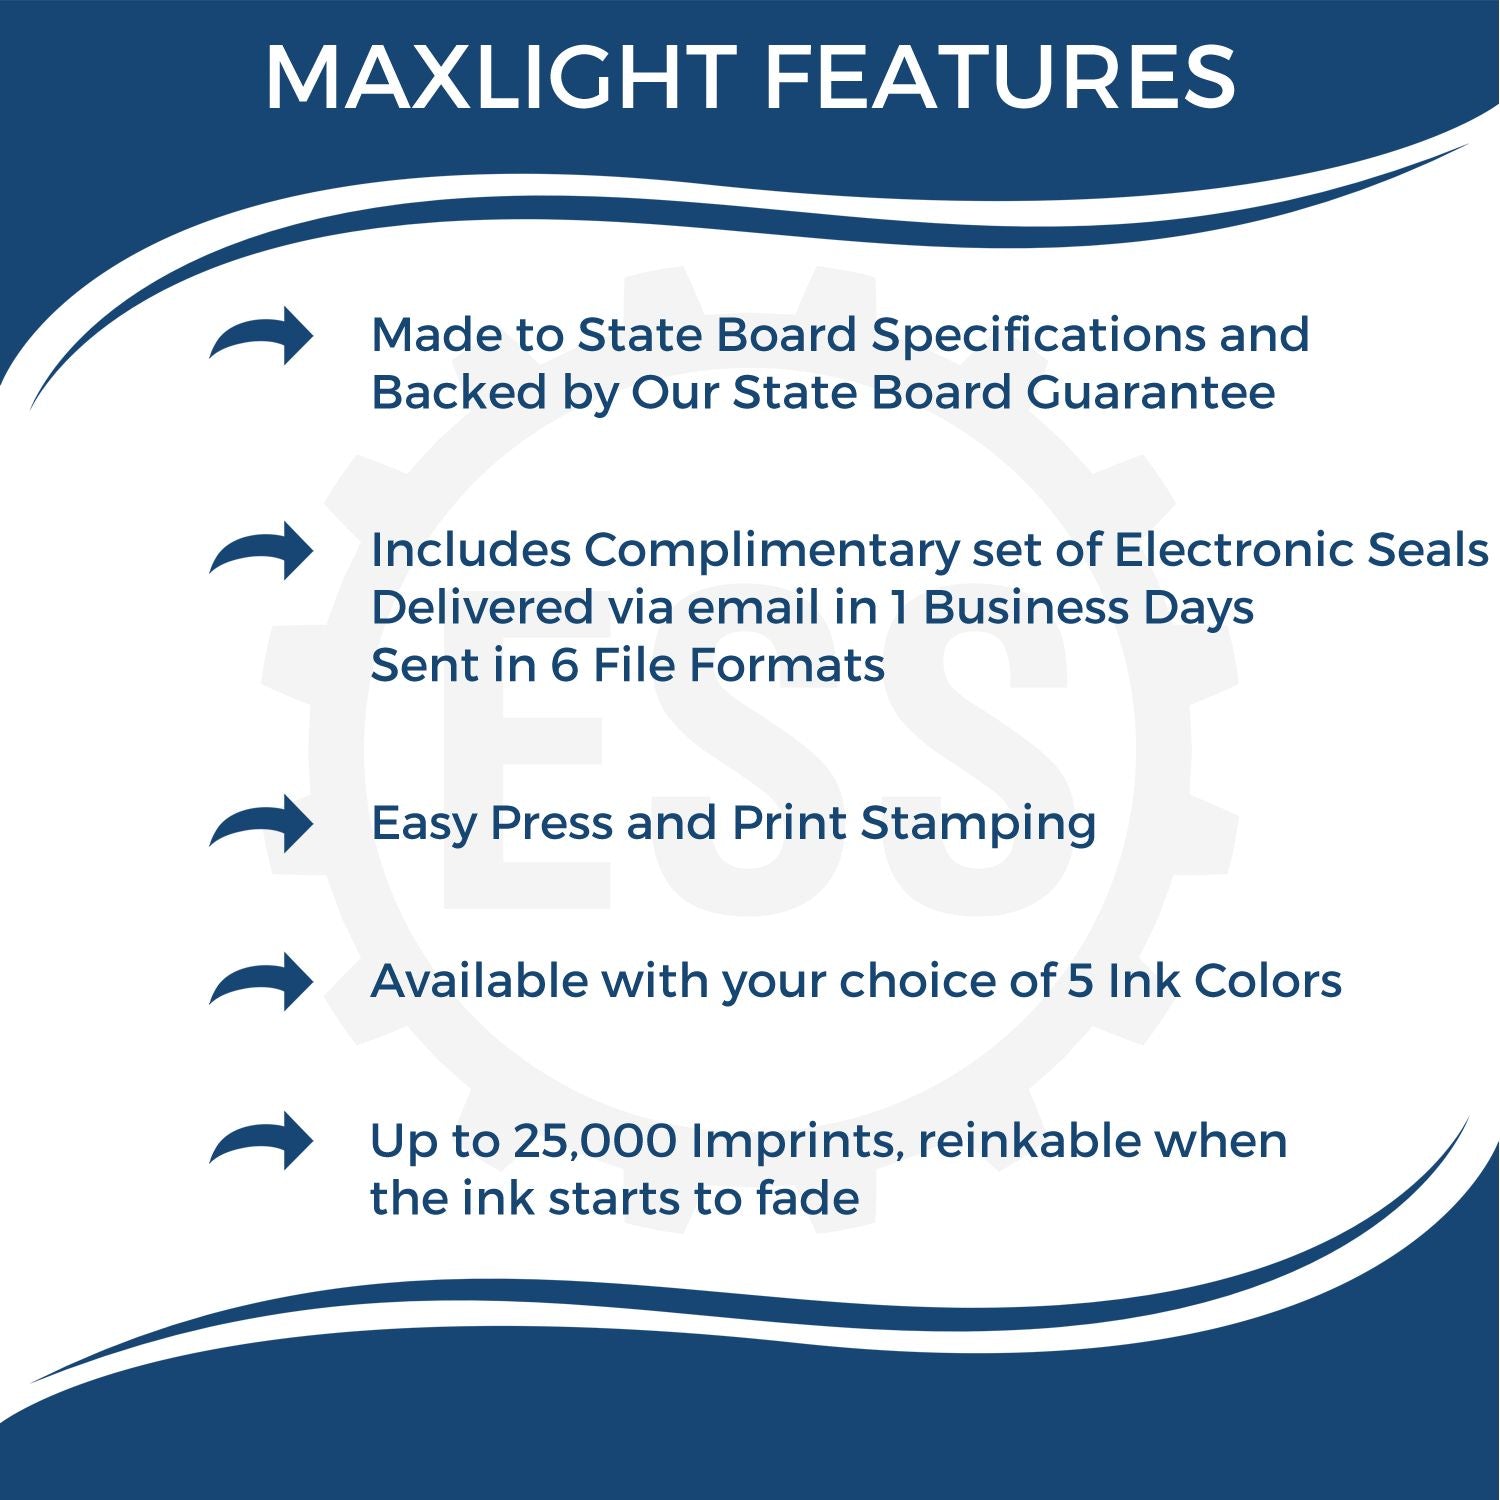 A picture of an infographic highlighting the selling points for the Premium MaxLight Pre-Inked Wisconsin Engineering Stamp